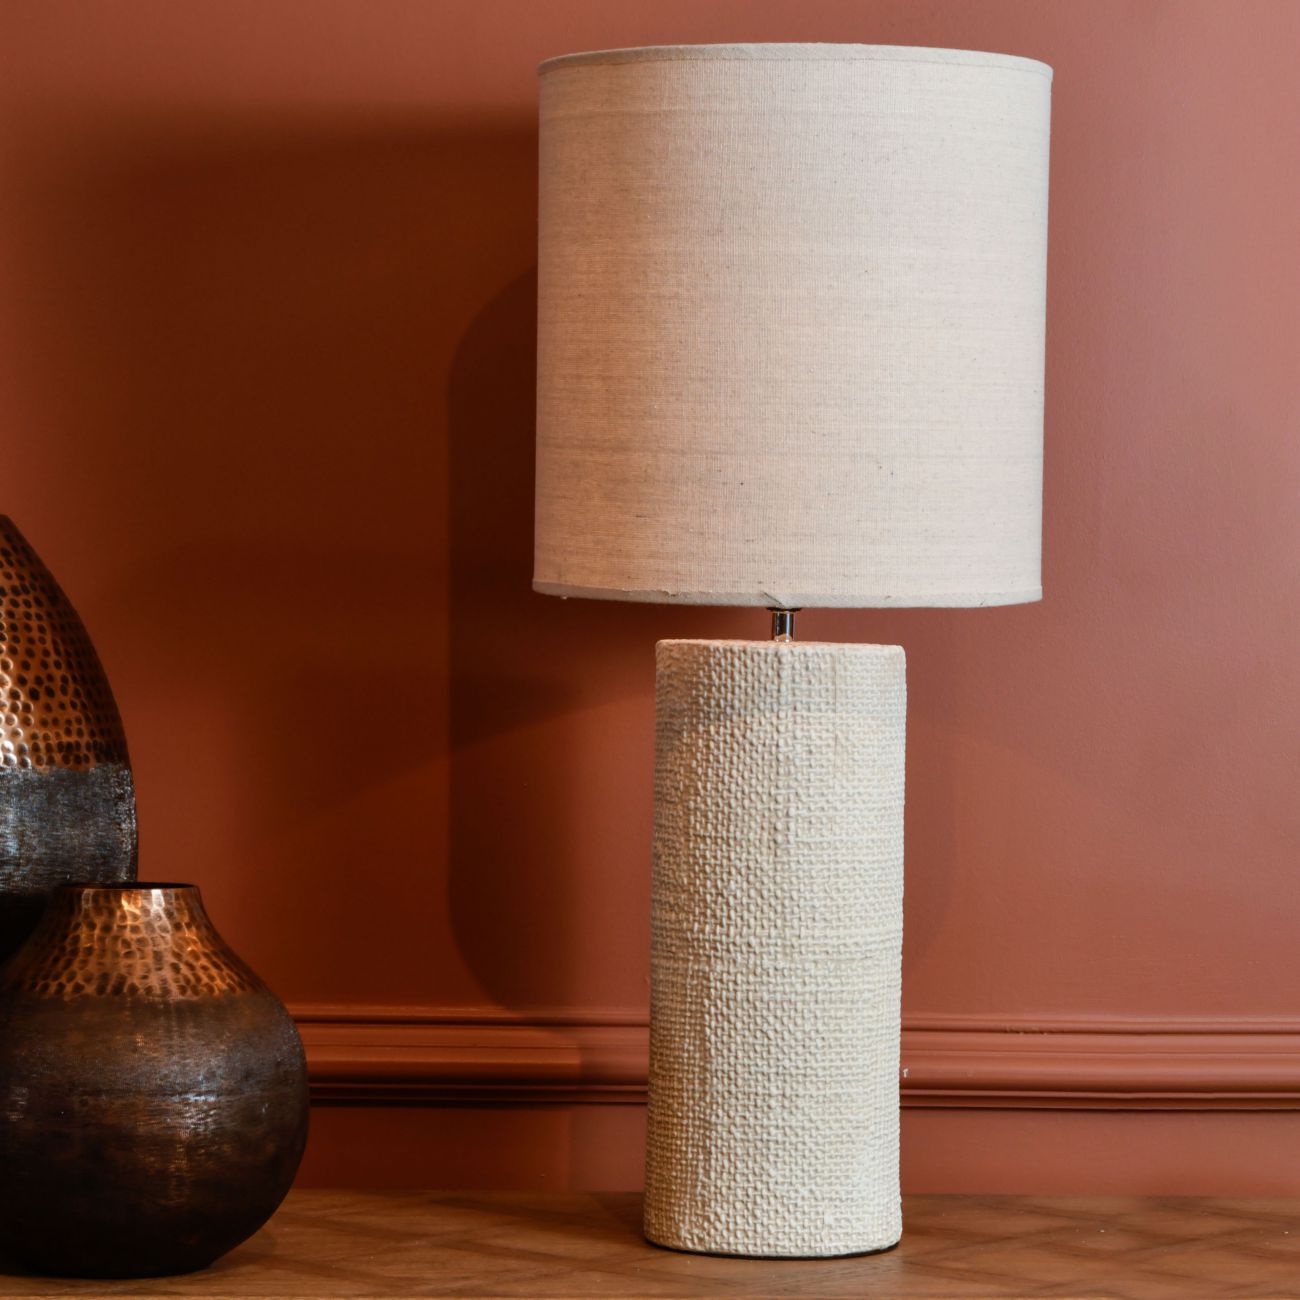 Textured Cream Porcelain Lamp with Shade